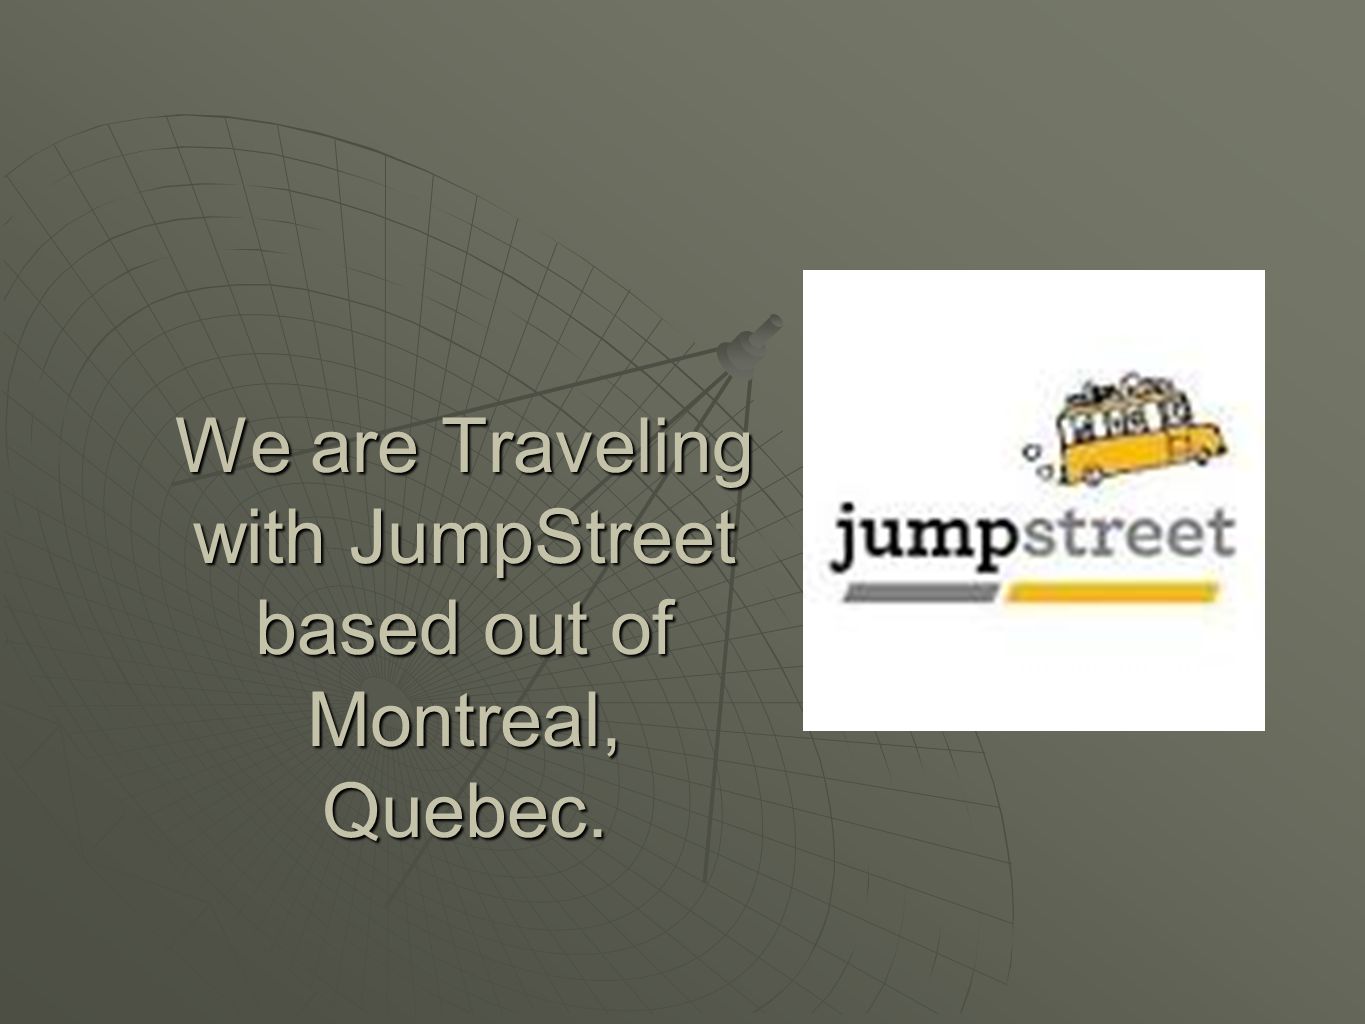 We are Traveling with JumpStreet based out of Montreal, Quebec.